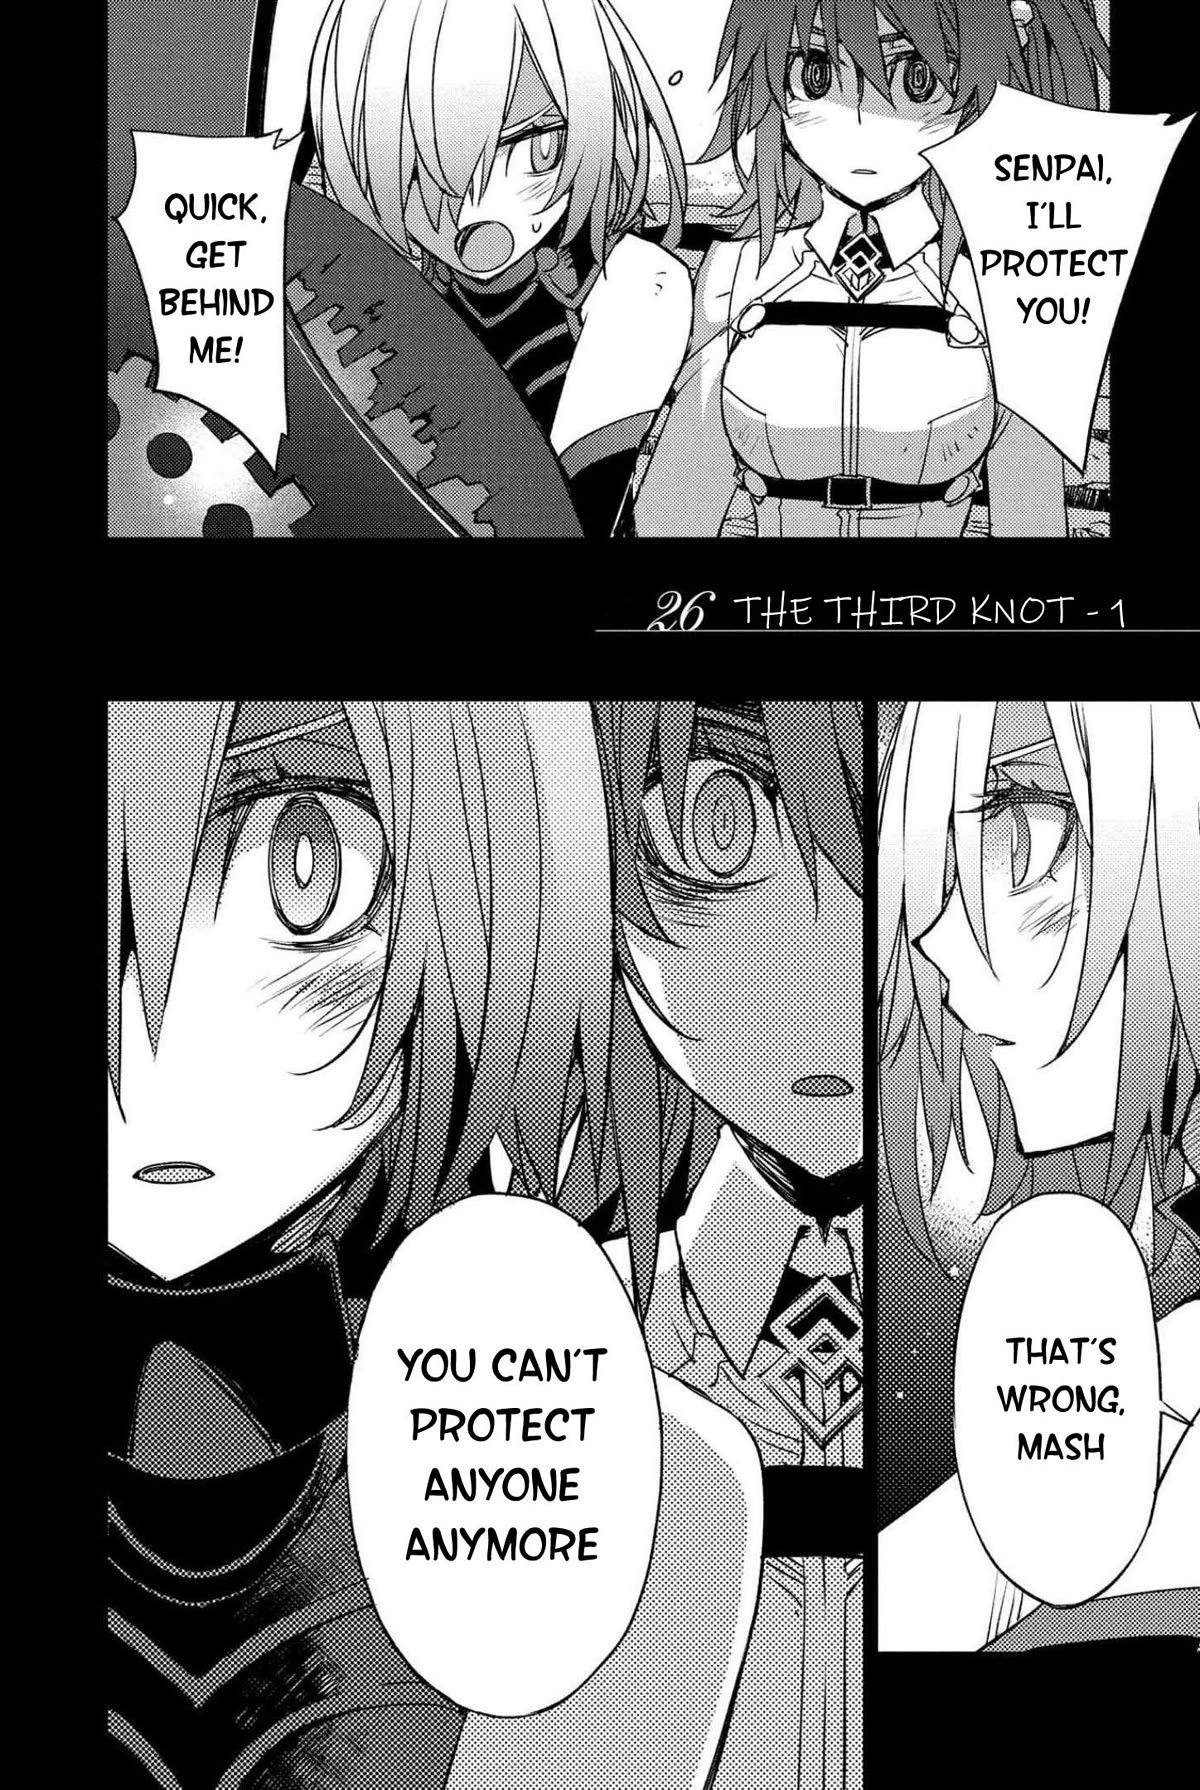 Fate/grand Order: Epic Of Remnant - Subspecies Singularity Iv: Taboo Advent Salem: Salem Of Heresy Chapter 26: The Third Knot - 1 - Picture 2